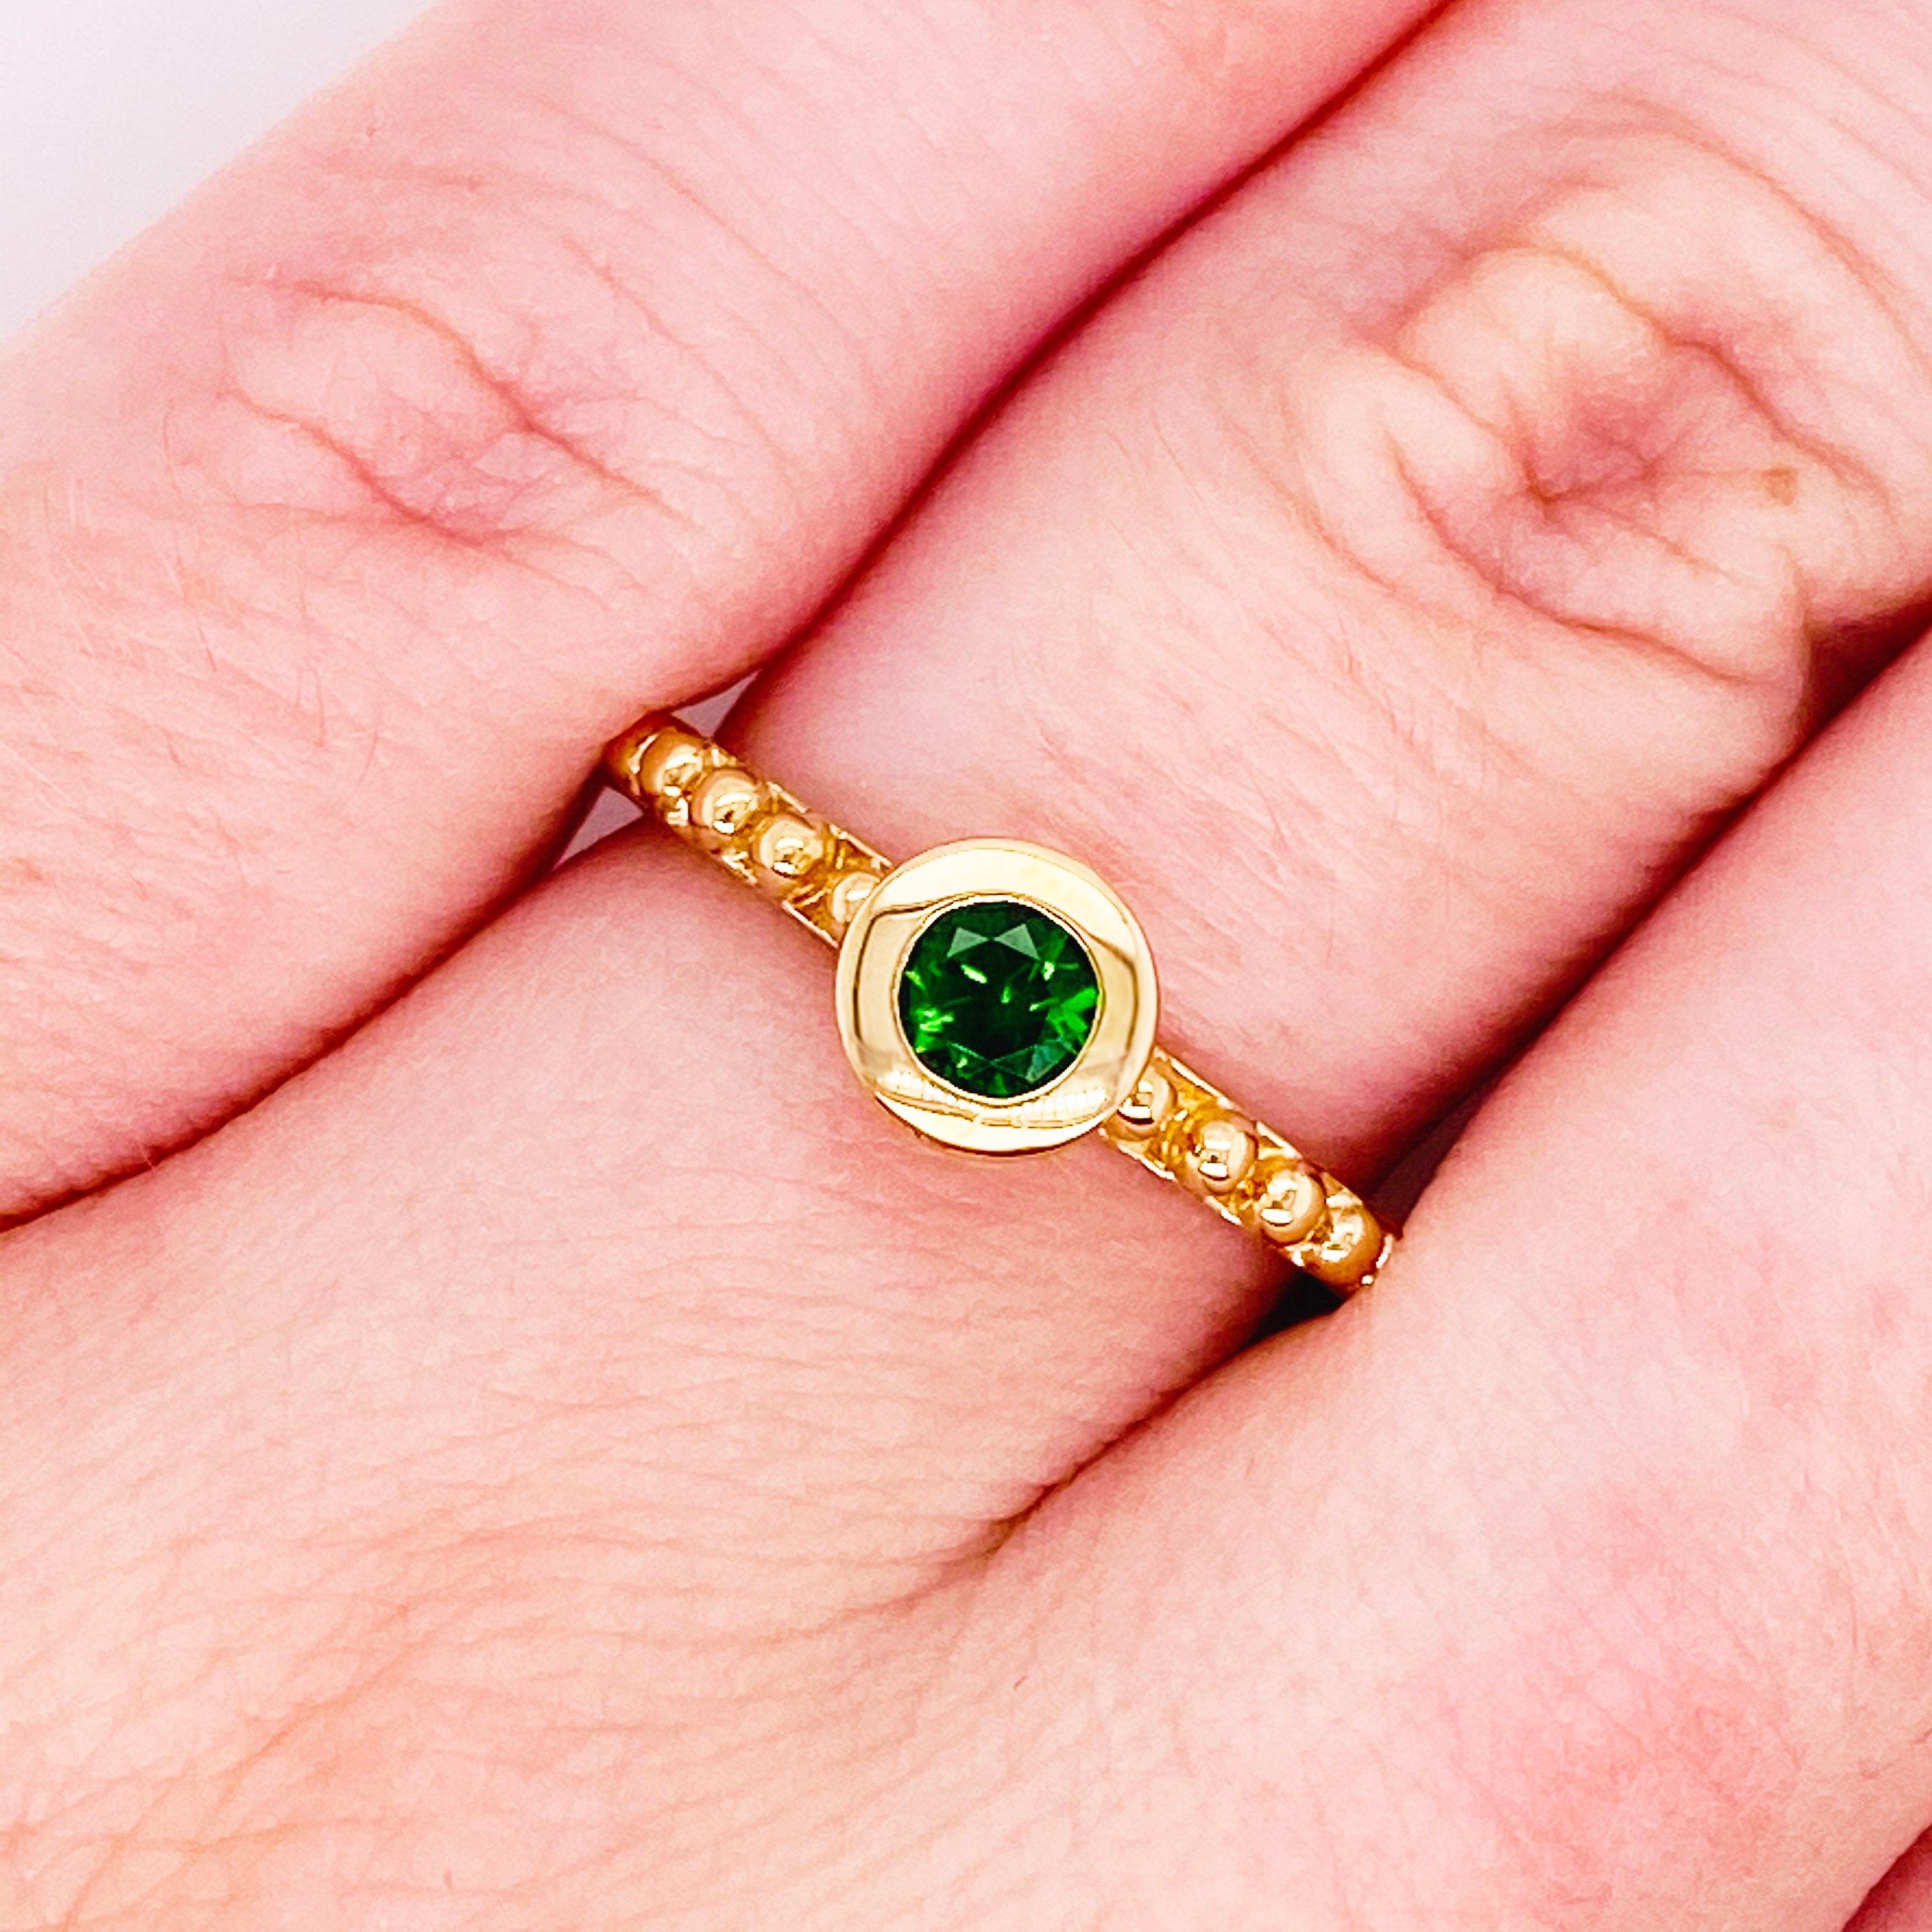 This stunningly beautiful rare diopside mined in Russia is known for its rarity and amazing color.  It is set in 14kt yellow gold would make anyone thrilled to receive it! This ring provides a look that is very modern and classic at the same time!